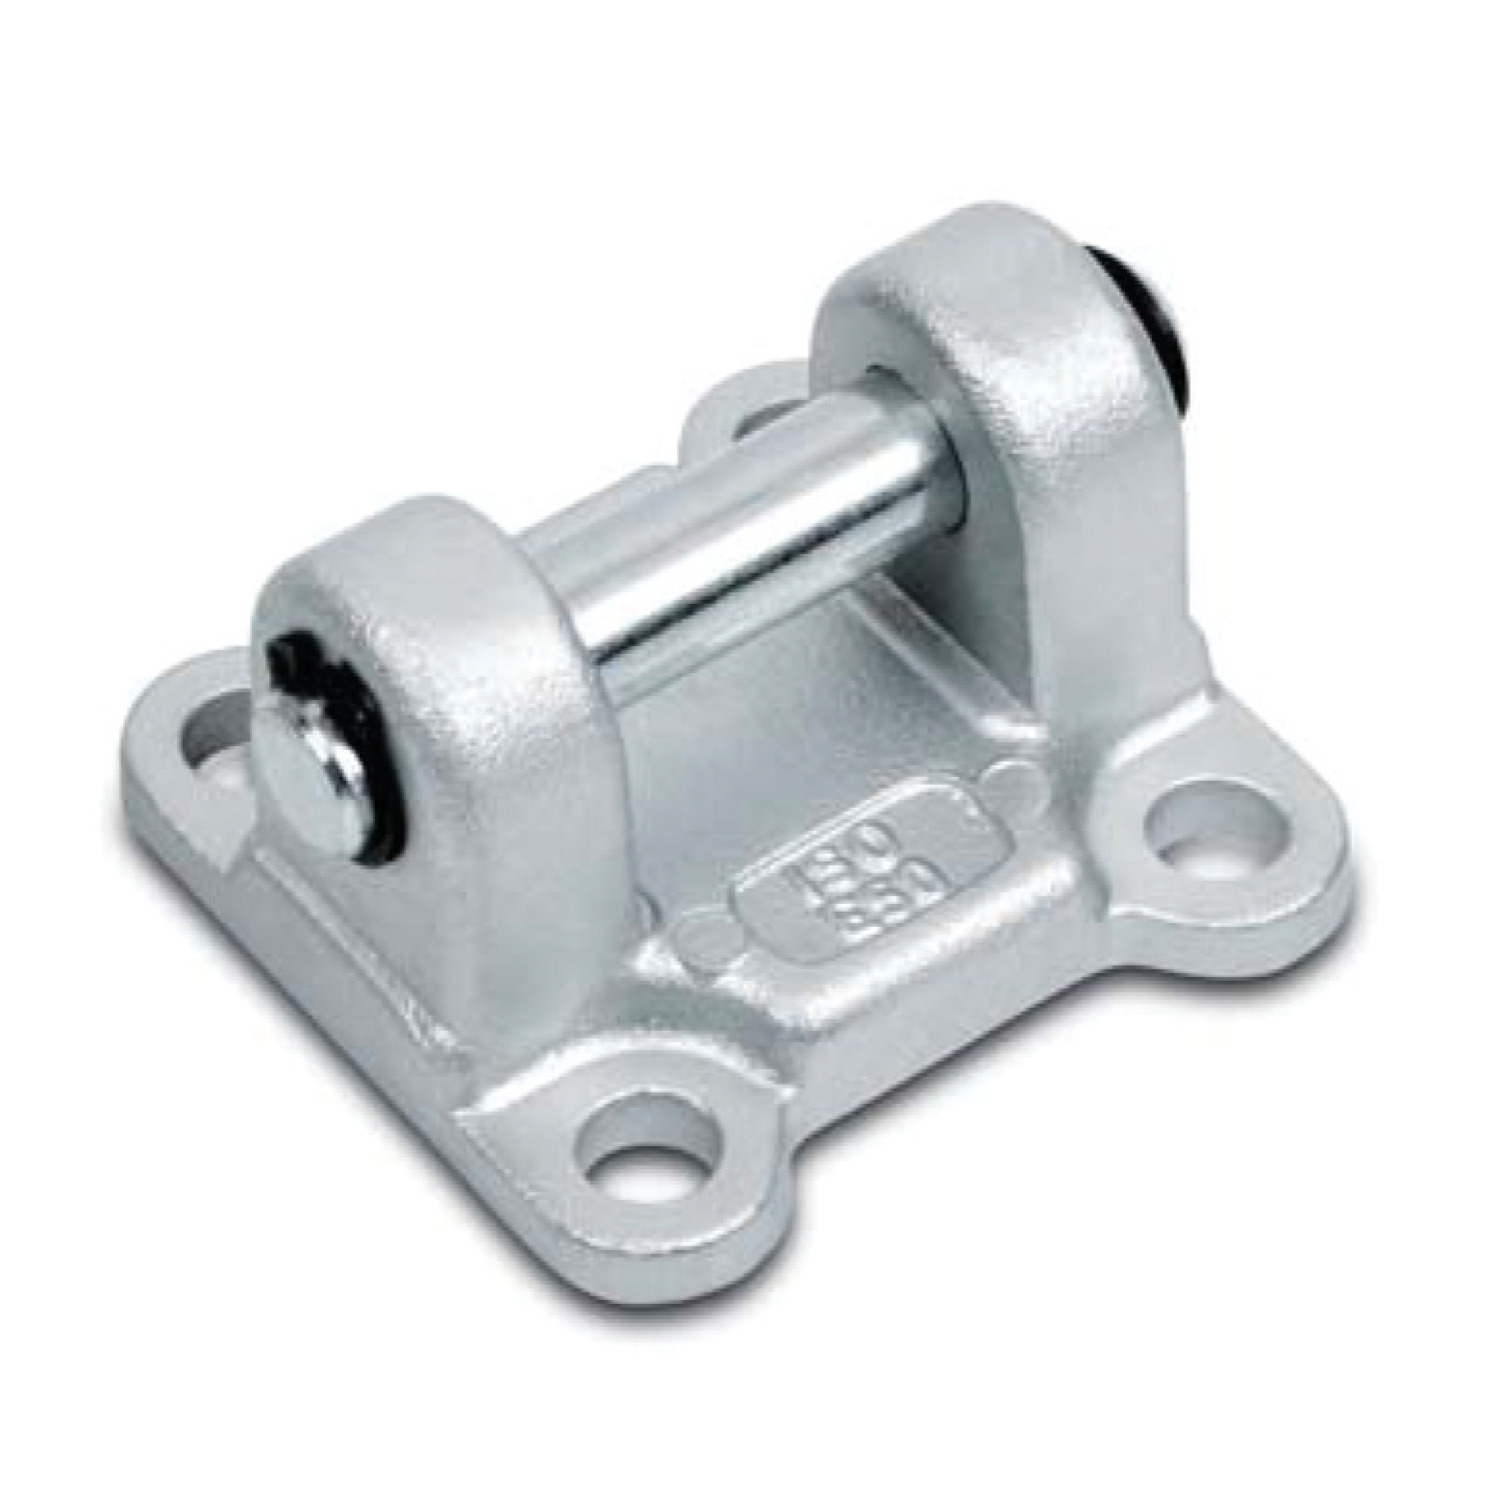 L4800 - Air Cylinder Mounts - ISO Series